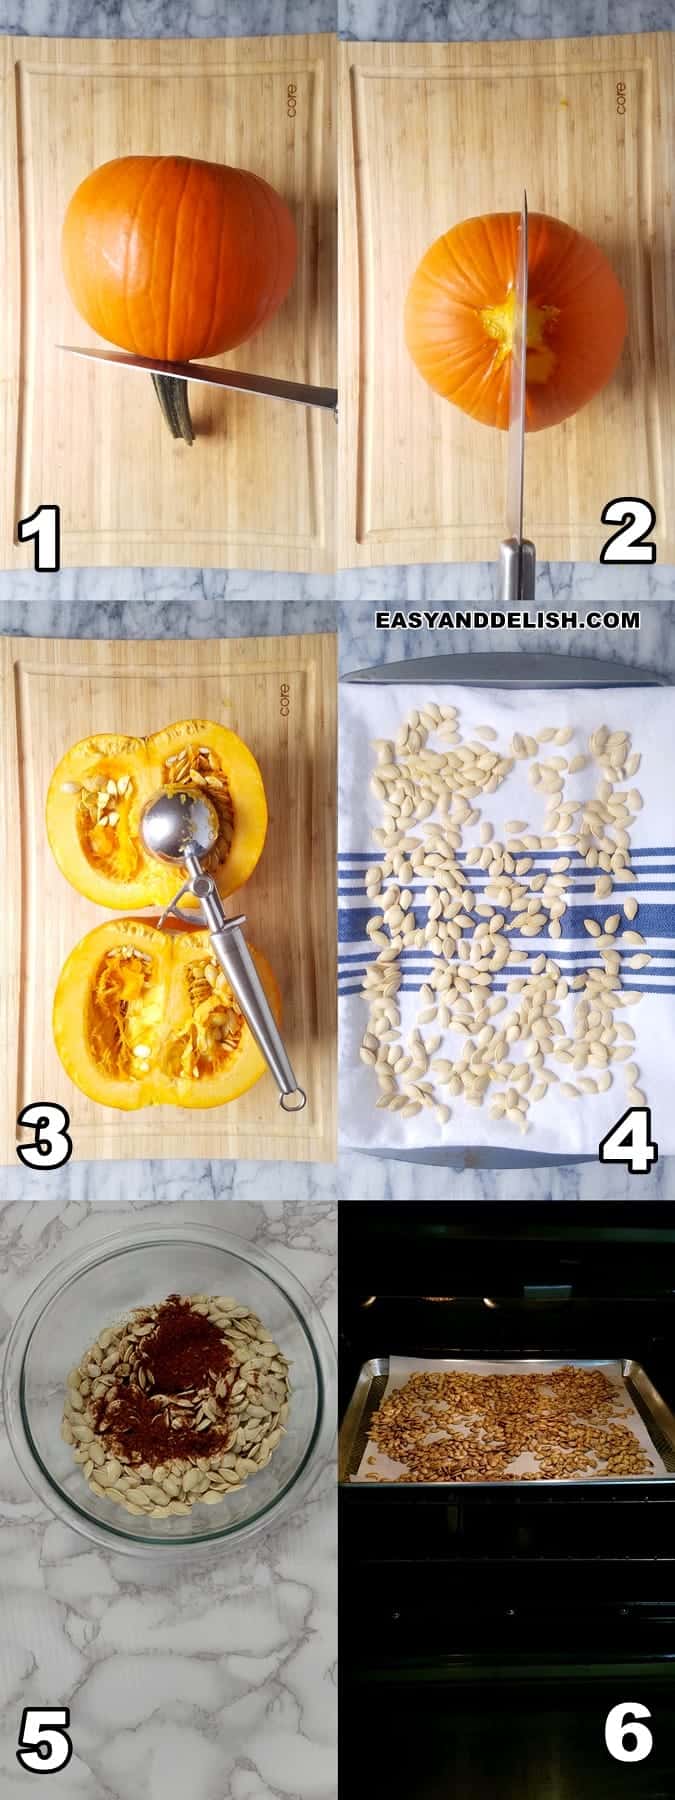 photo collage showing how to clean, dry, and roast pumpkin seeds